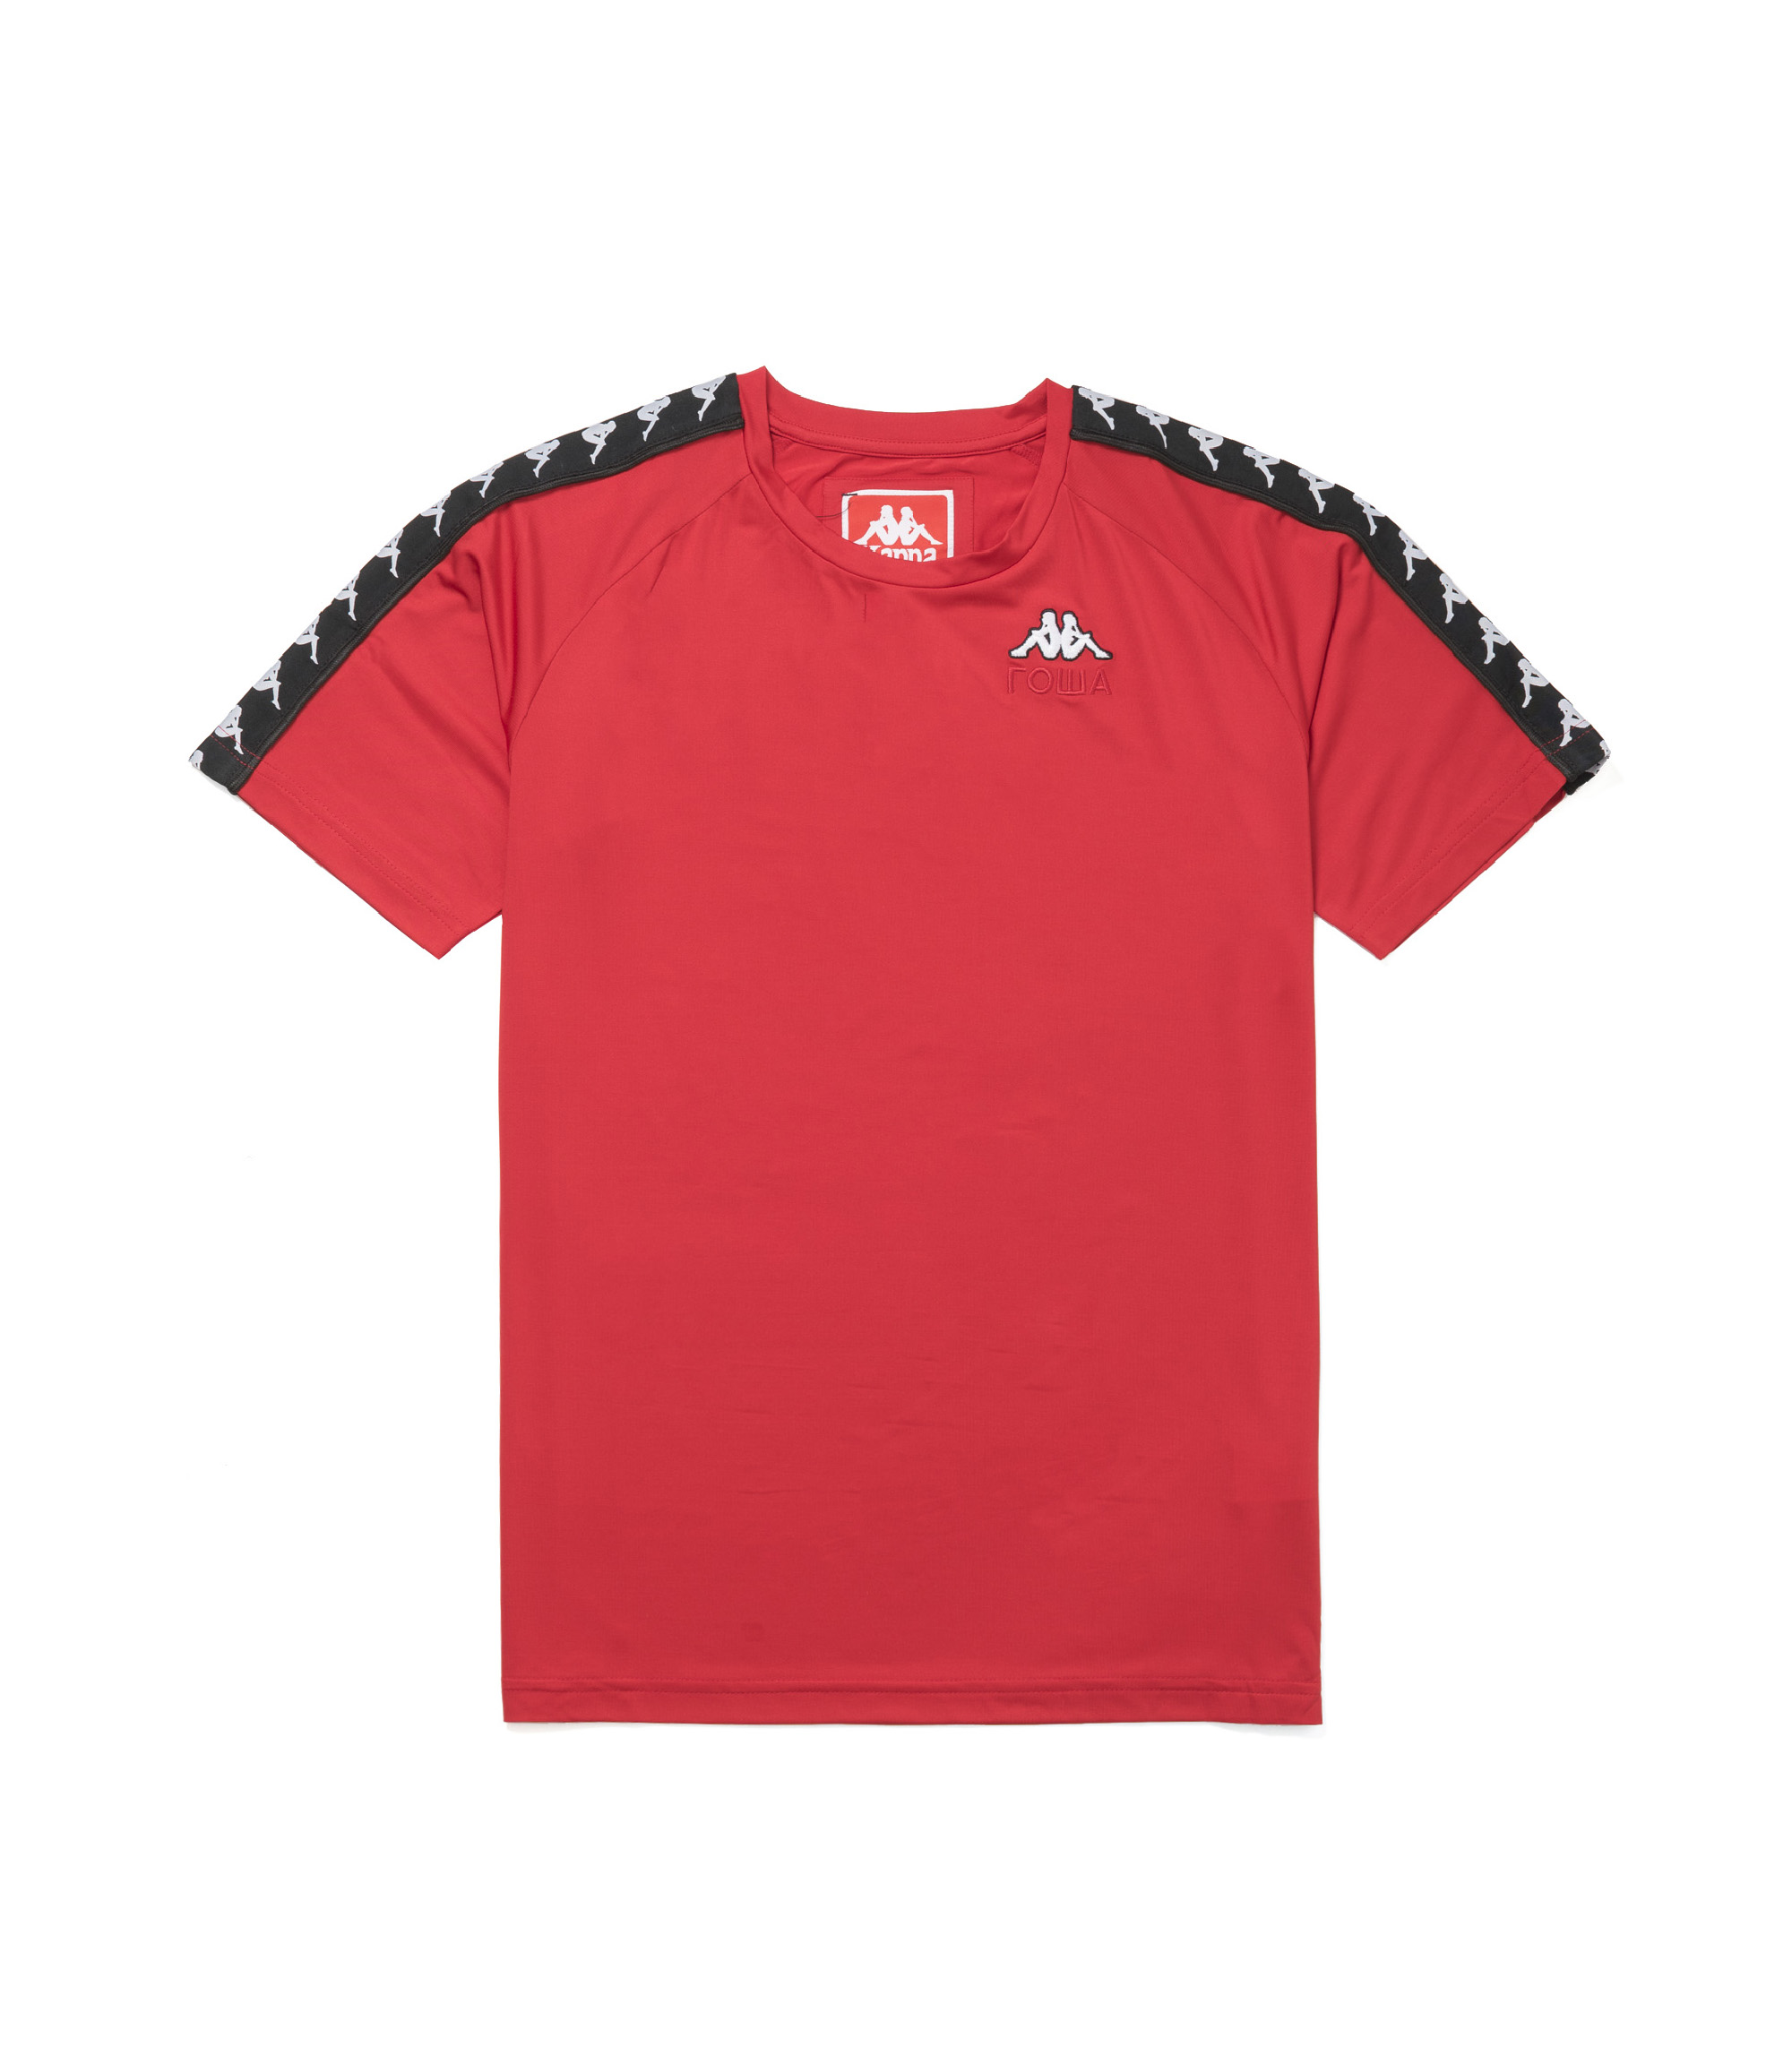 Shop x T-Shirt Red at itk online store